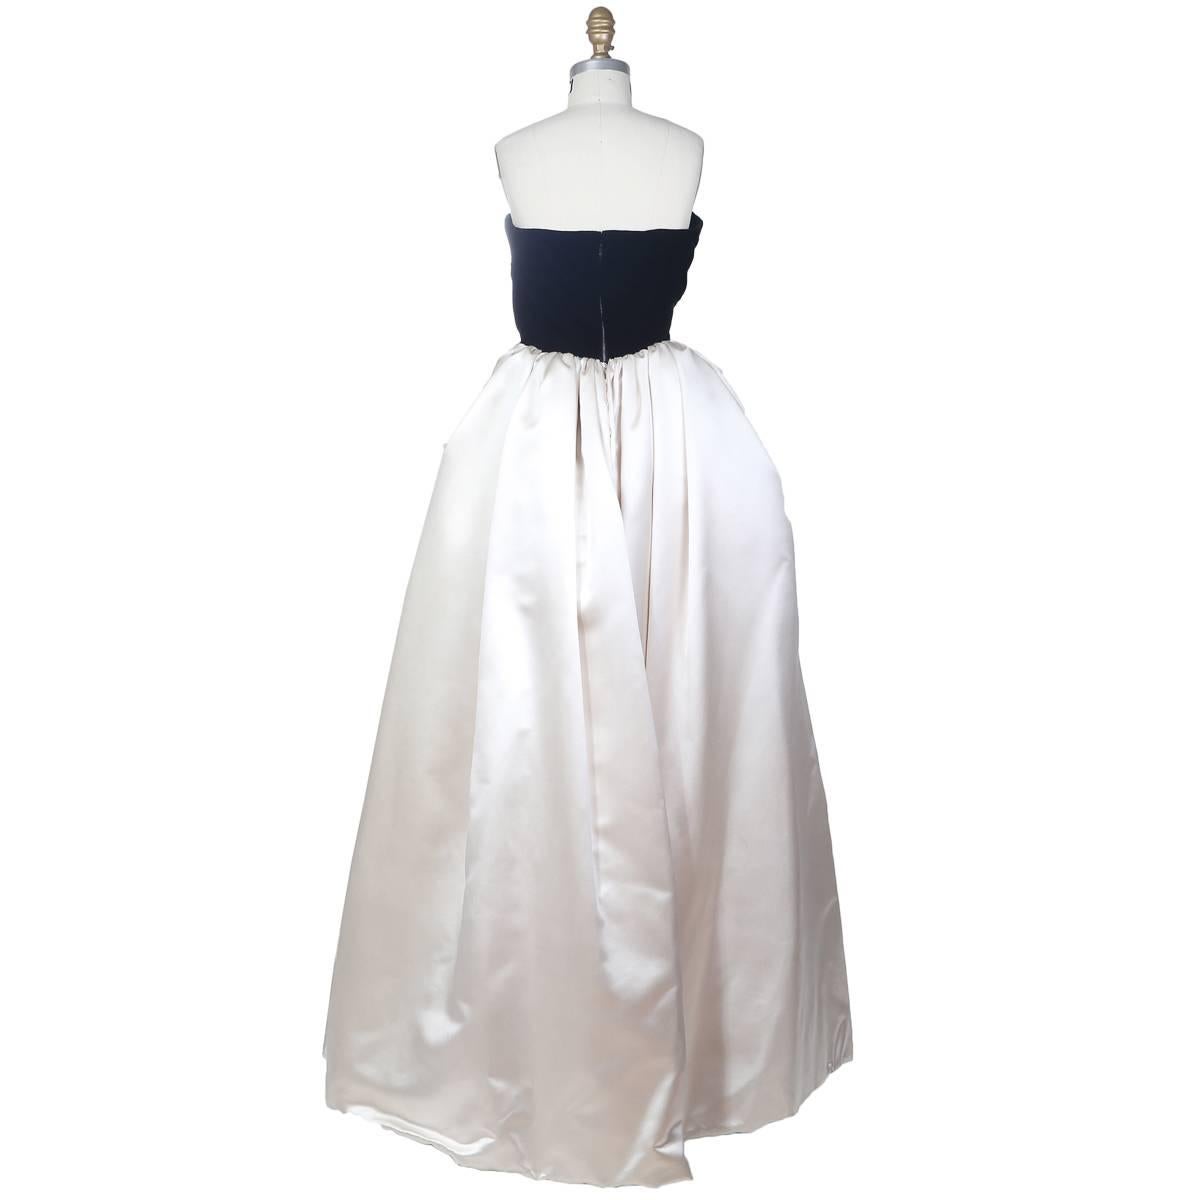 This is a strapless ball gown by Mila Shon c. 1980s. It features a velvet bust with polka dot tulle draped over it and the skirt is in white silk.